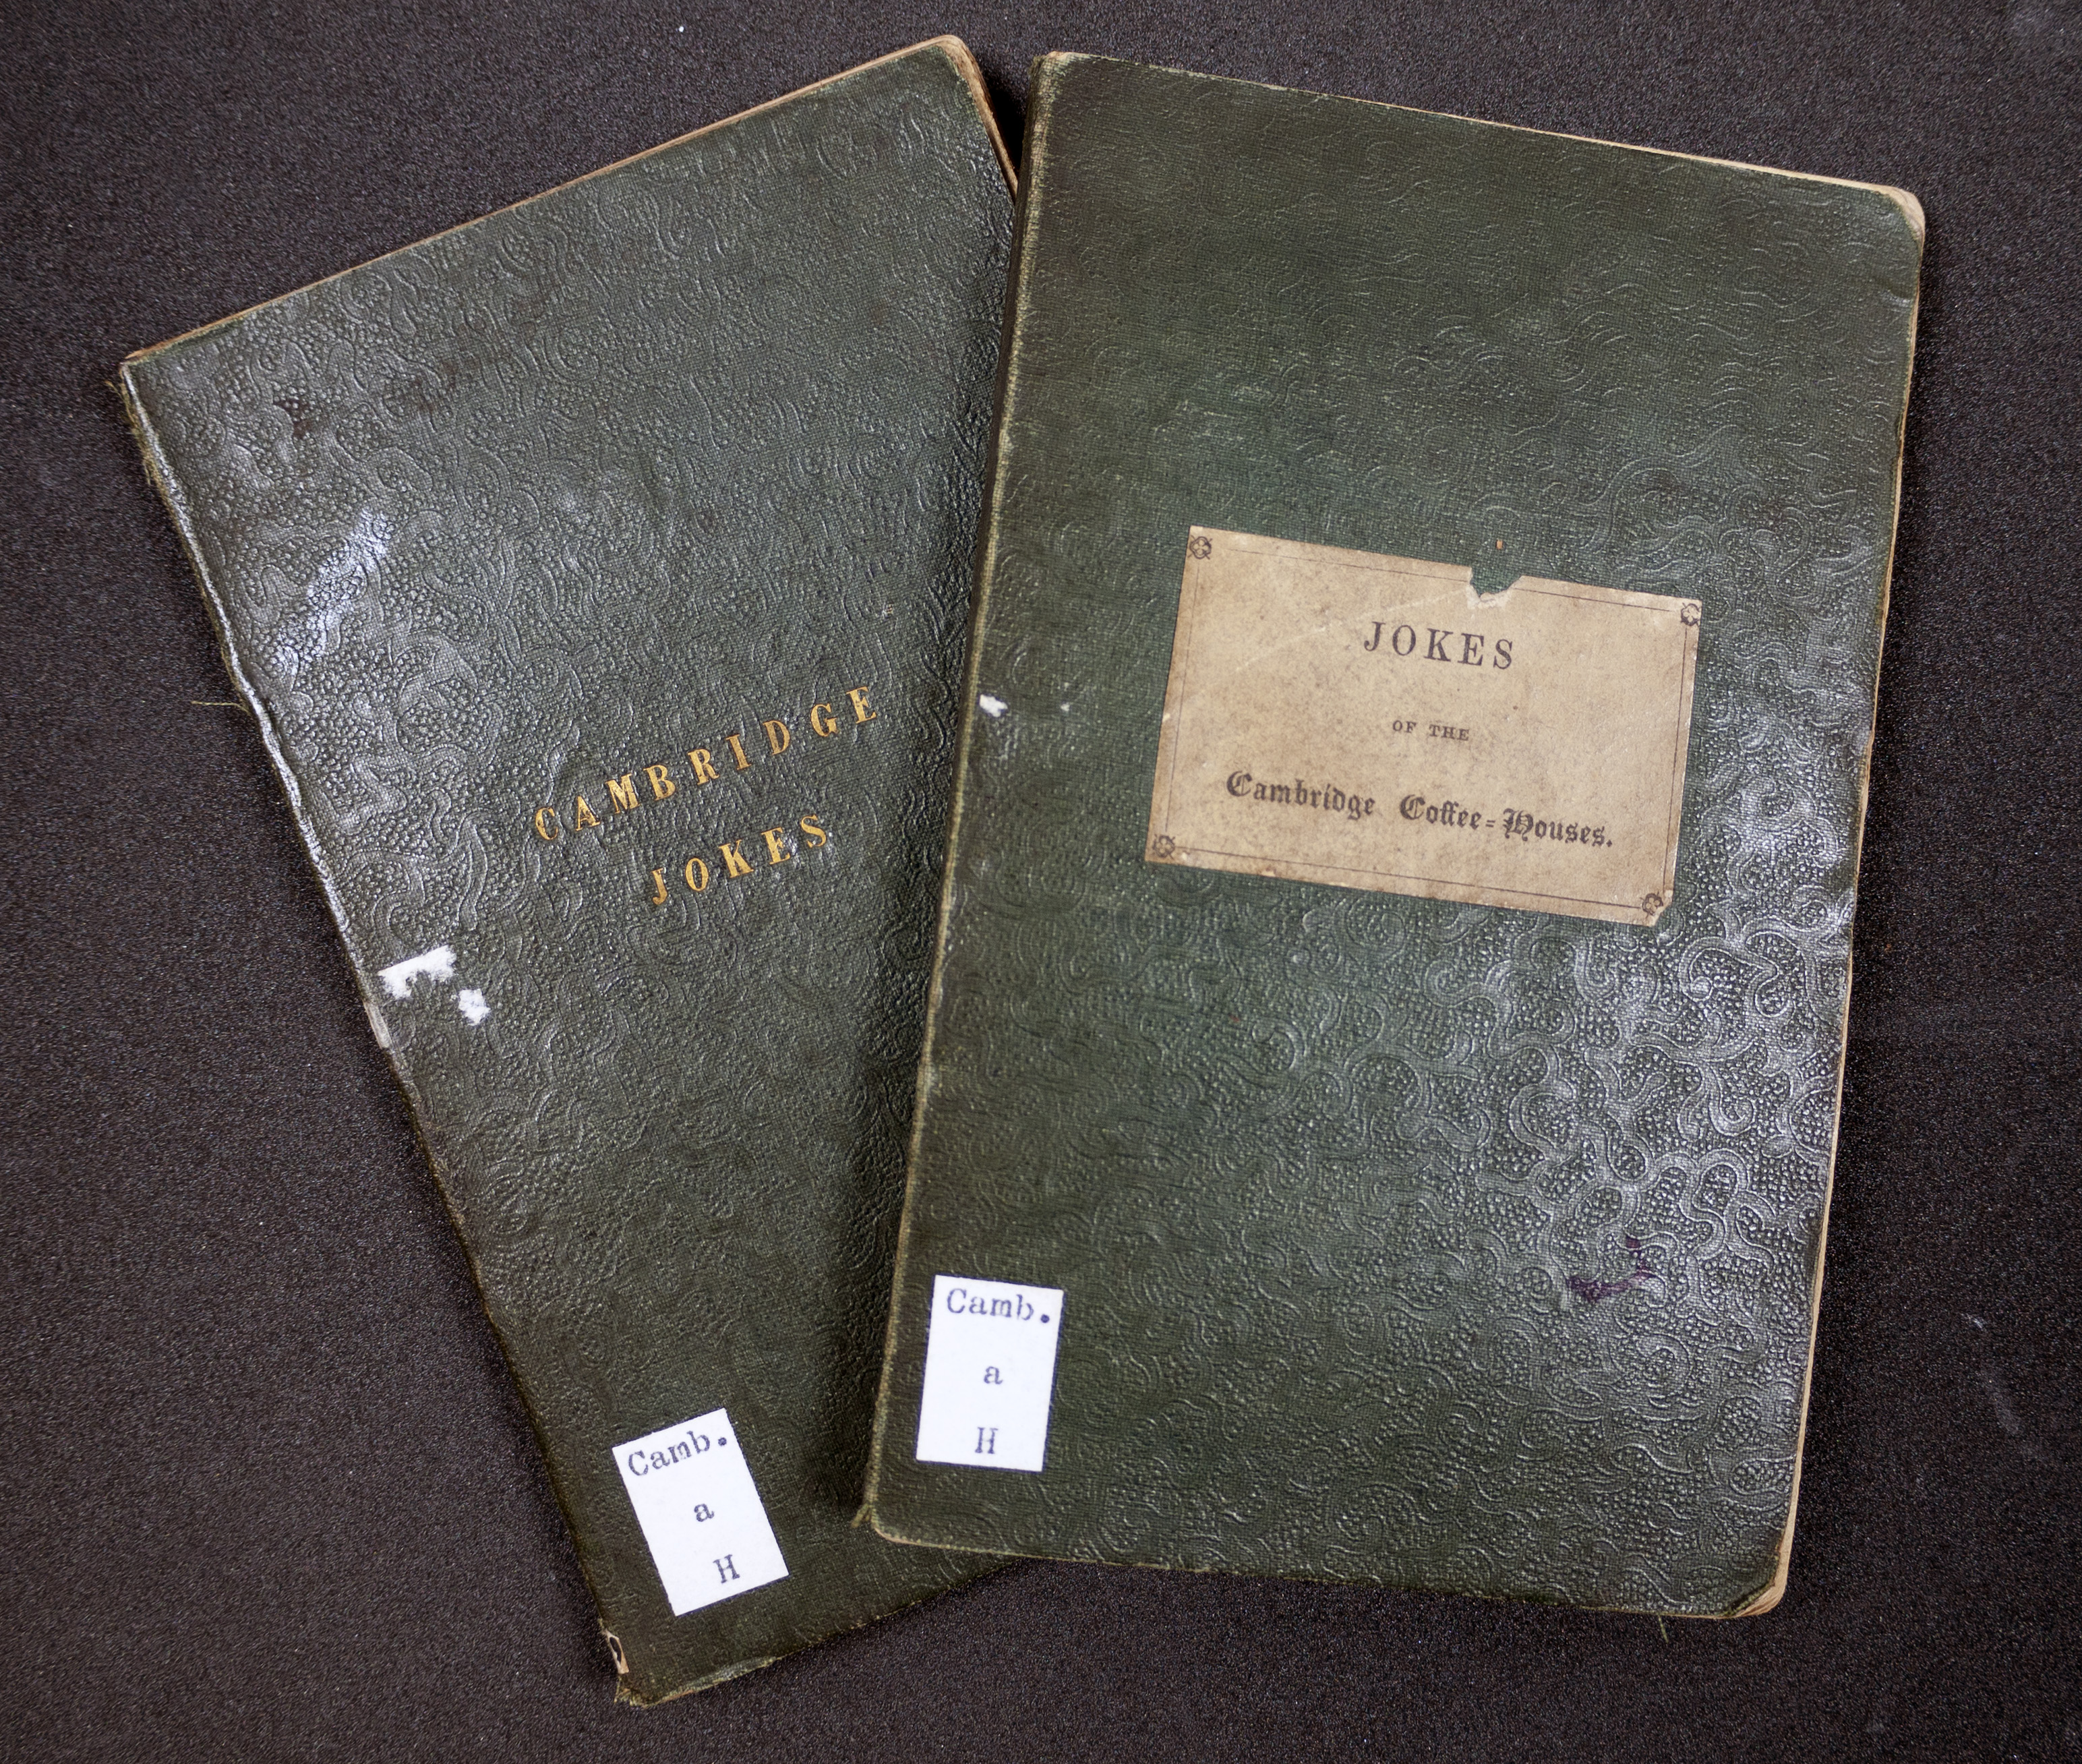 Two small green-bound books, overlaid so that the titles on their covers remain visible. The left- and bottommost book has 'Cambridge Jokes' embossed in gold, and the right- and topmost bears a paper label: 'Jokes of the Cambridge Coffee-Houses'.